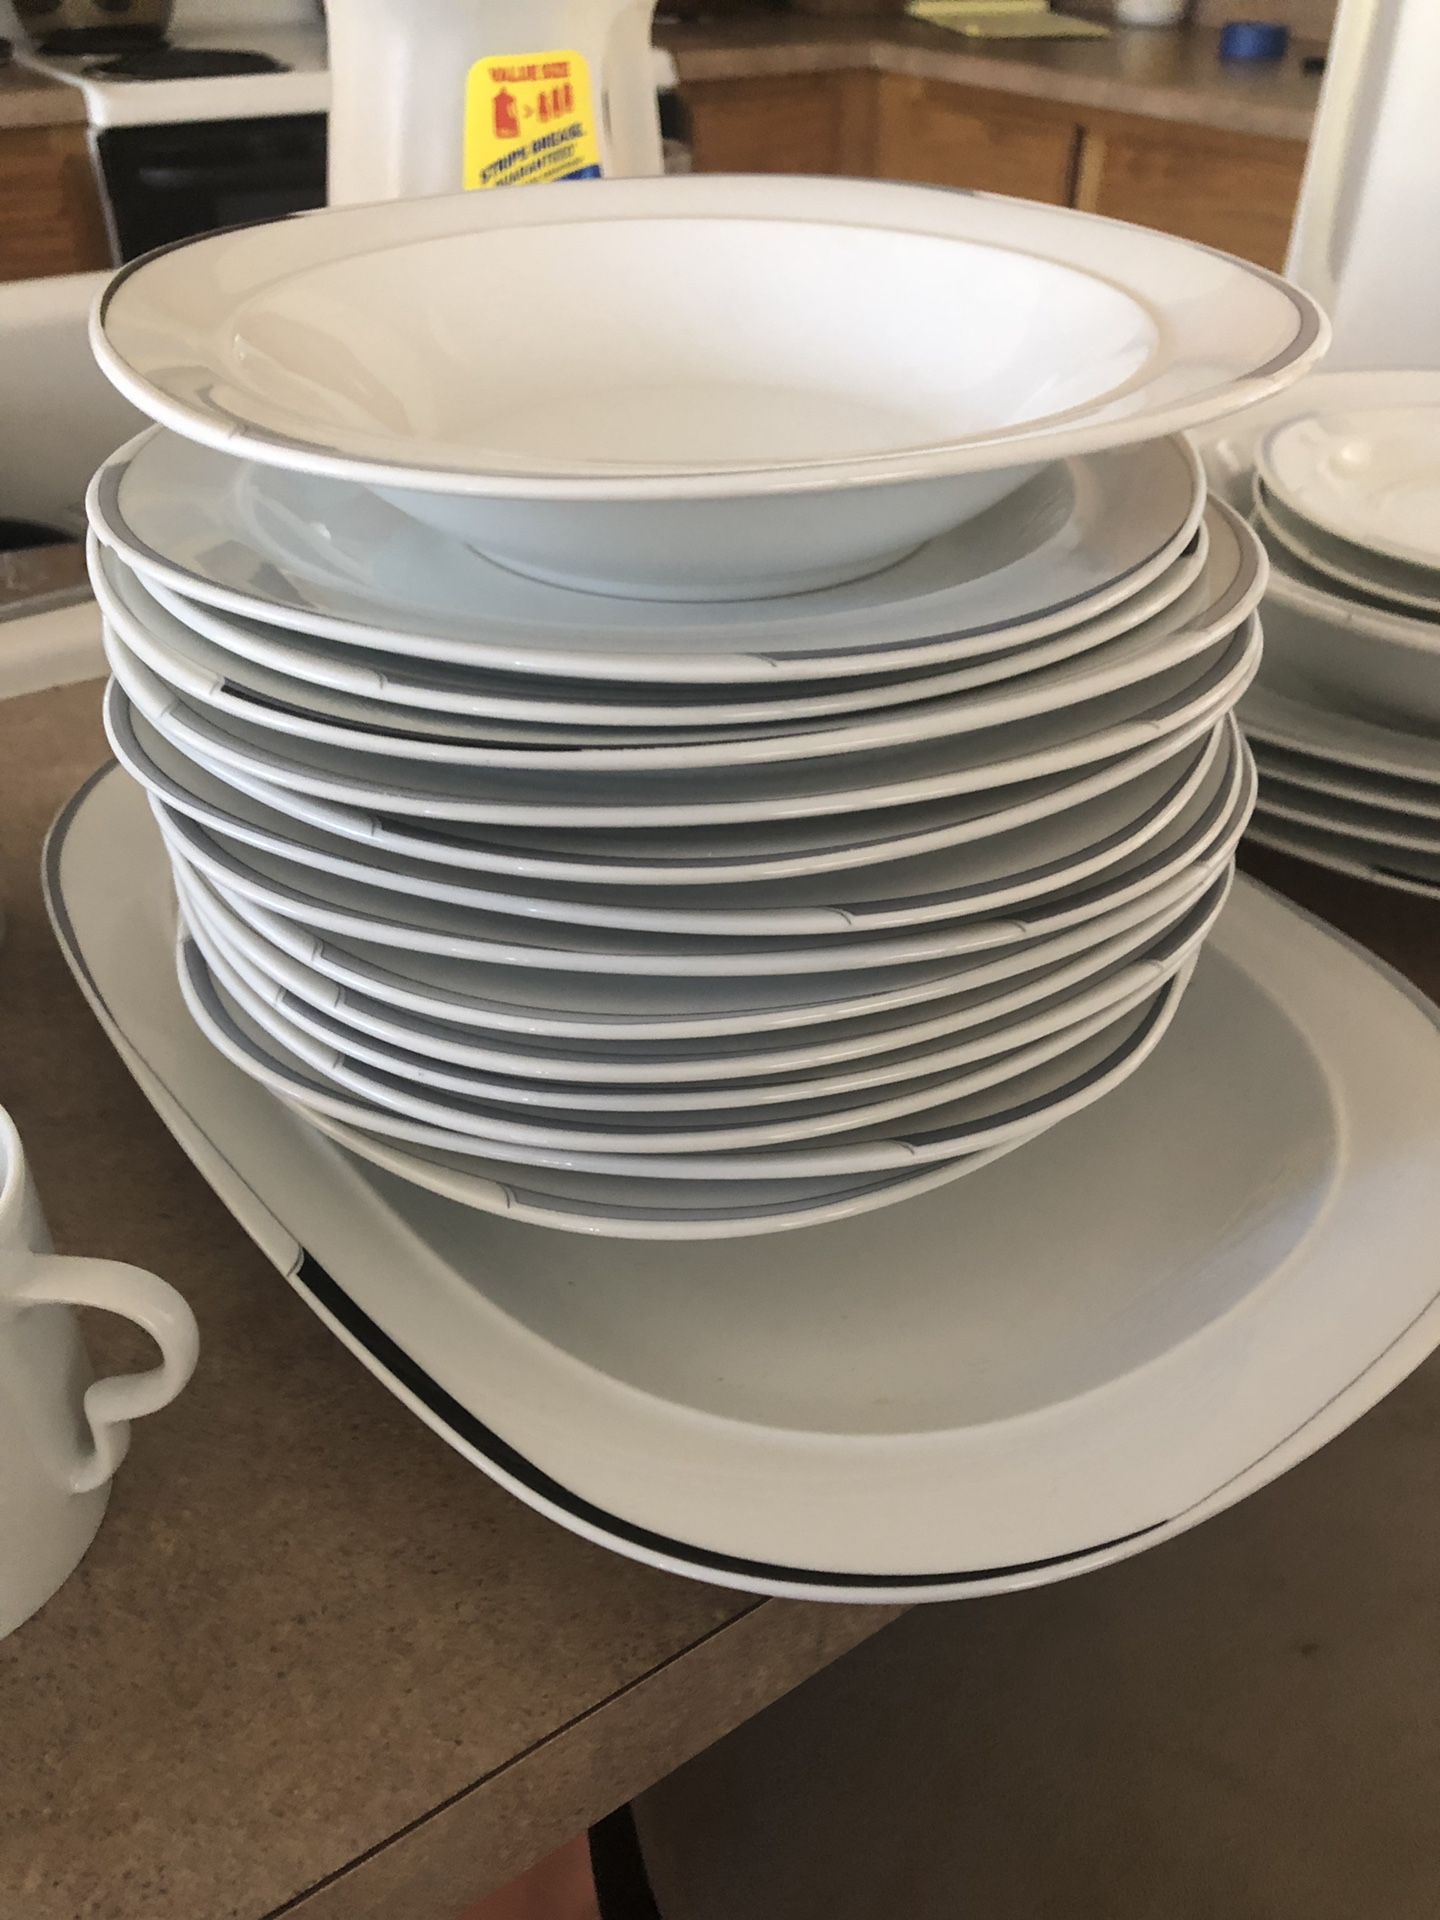 Plate and cup set